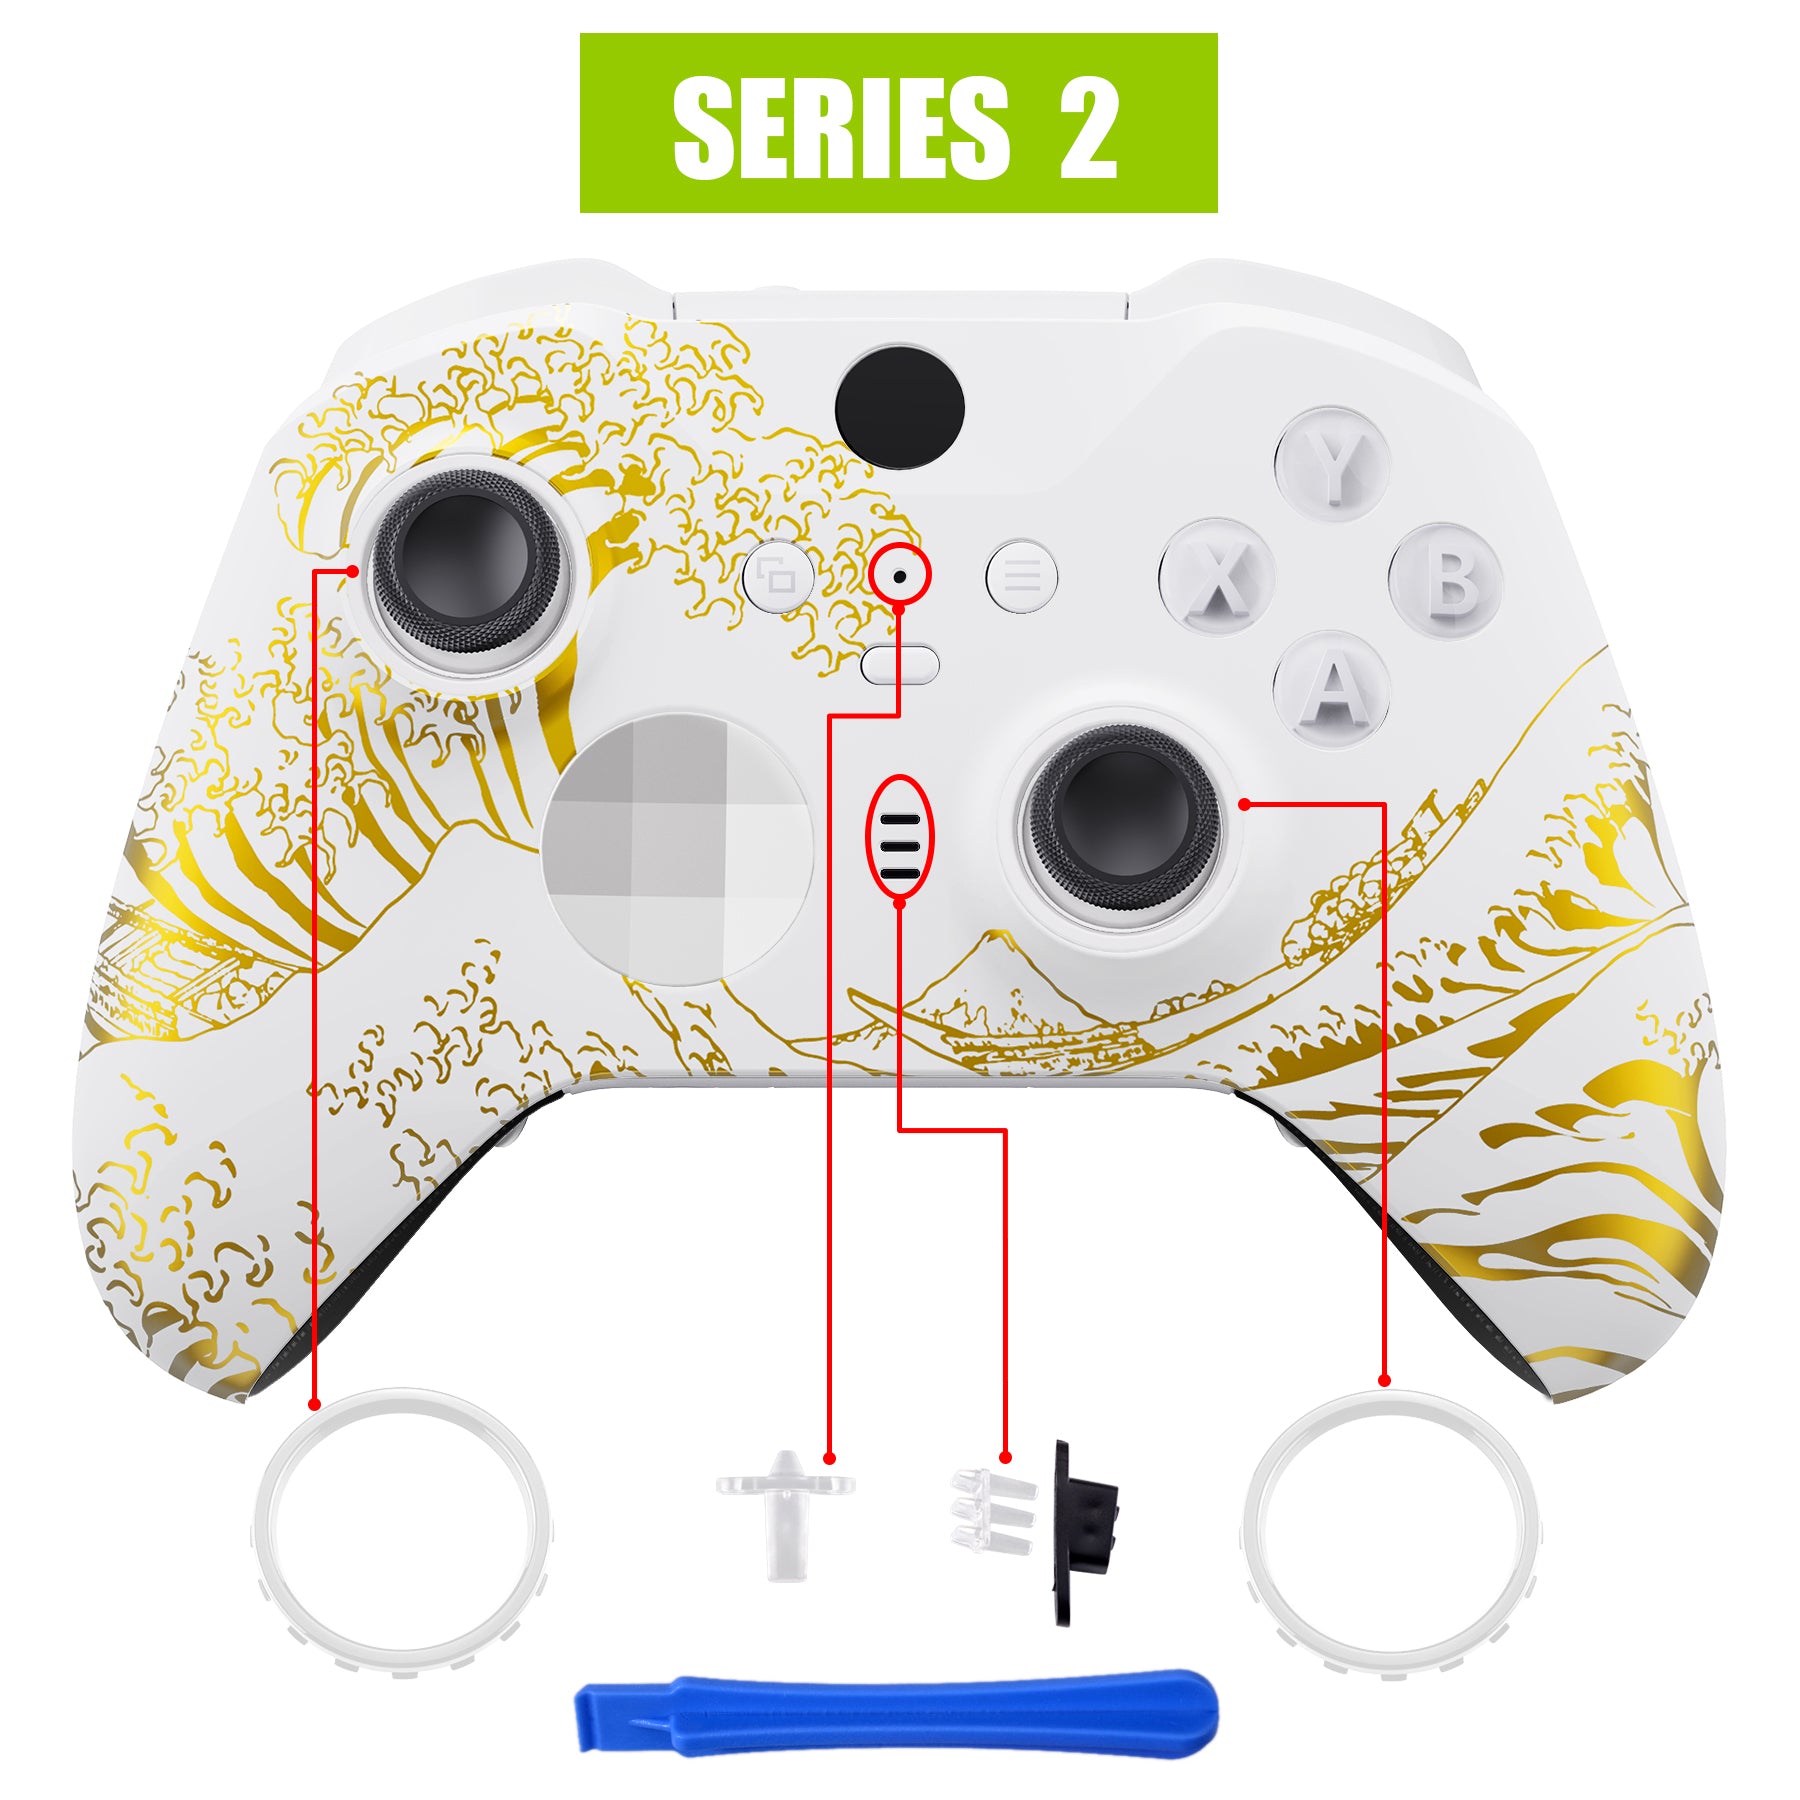 eXtremeRate Replacement Front Housing Shell Case with Accent Rings for Xbox One Elite Series 2 & Elite 2 Core Controller (Model 1797) - The Great GOLDEN Wave Off Kanagawa - White eXtremeRate